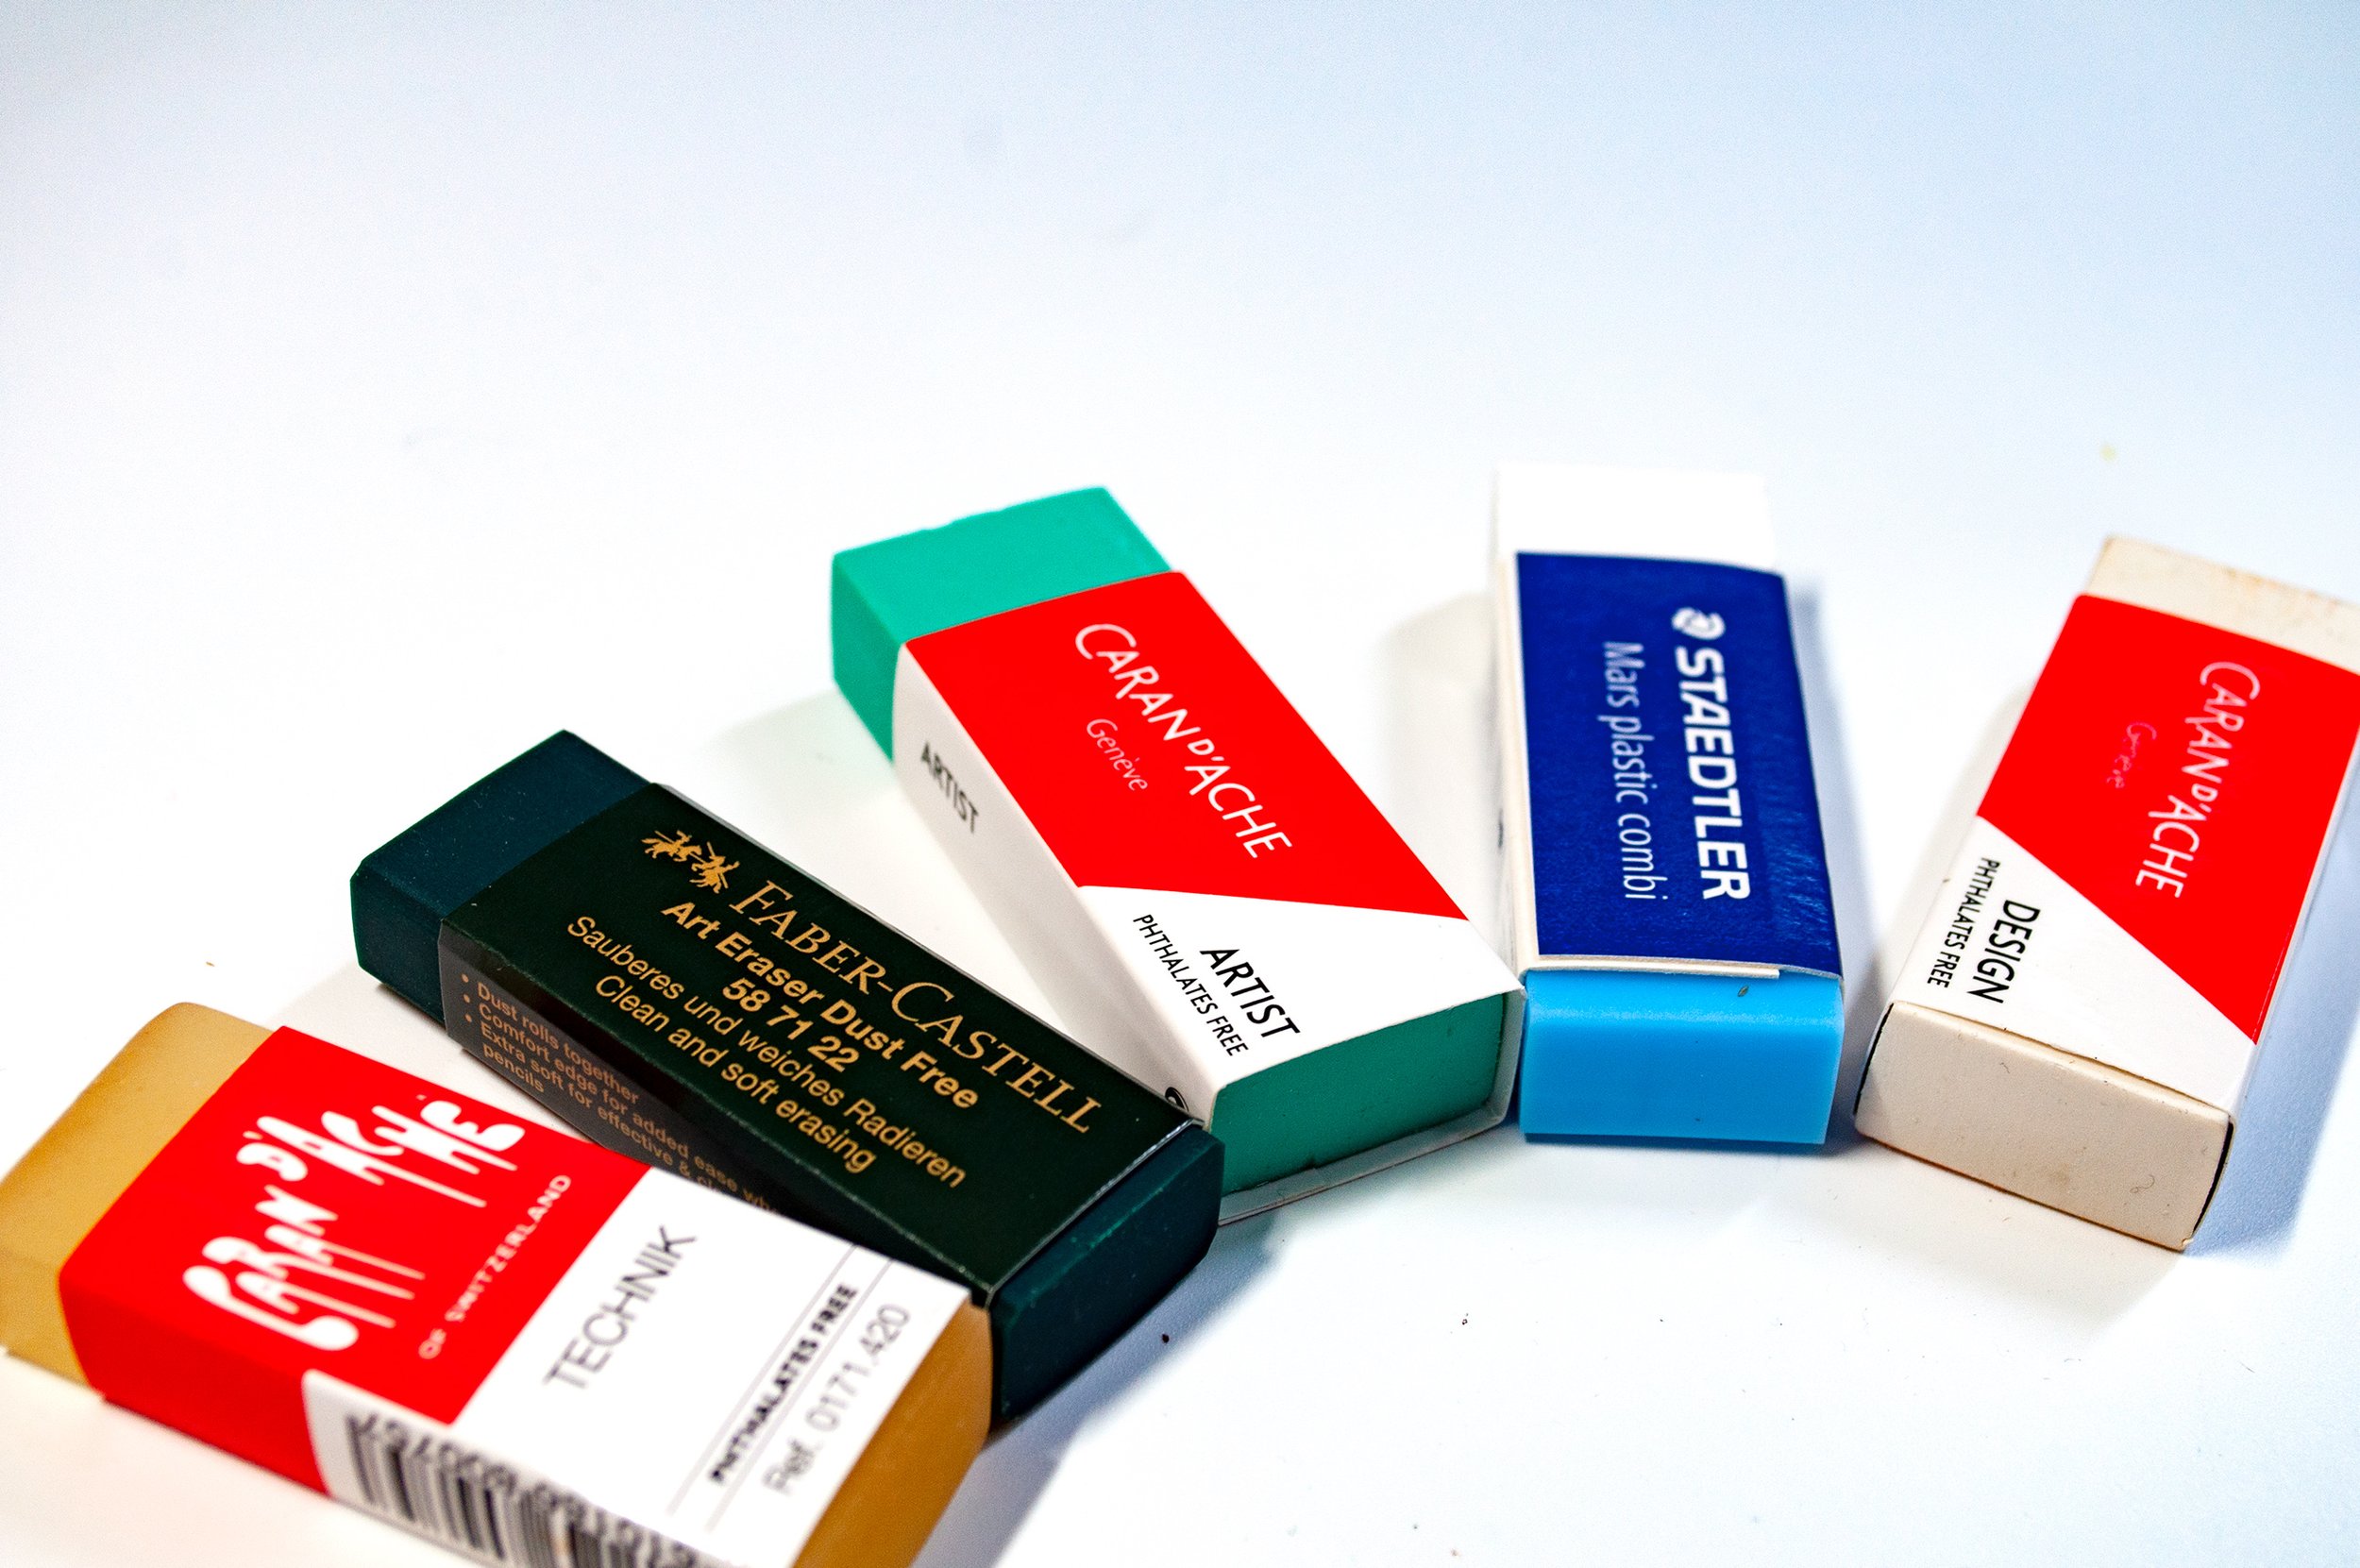 The Best and Worst Eraser Test Against Five Different Mediums